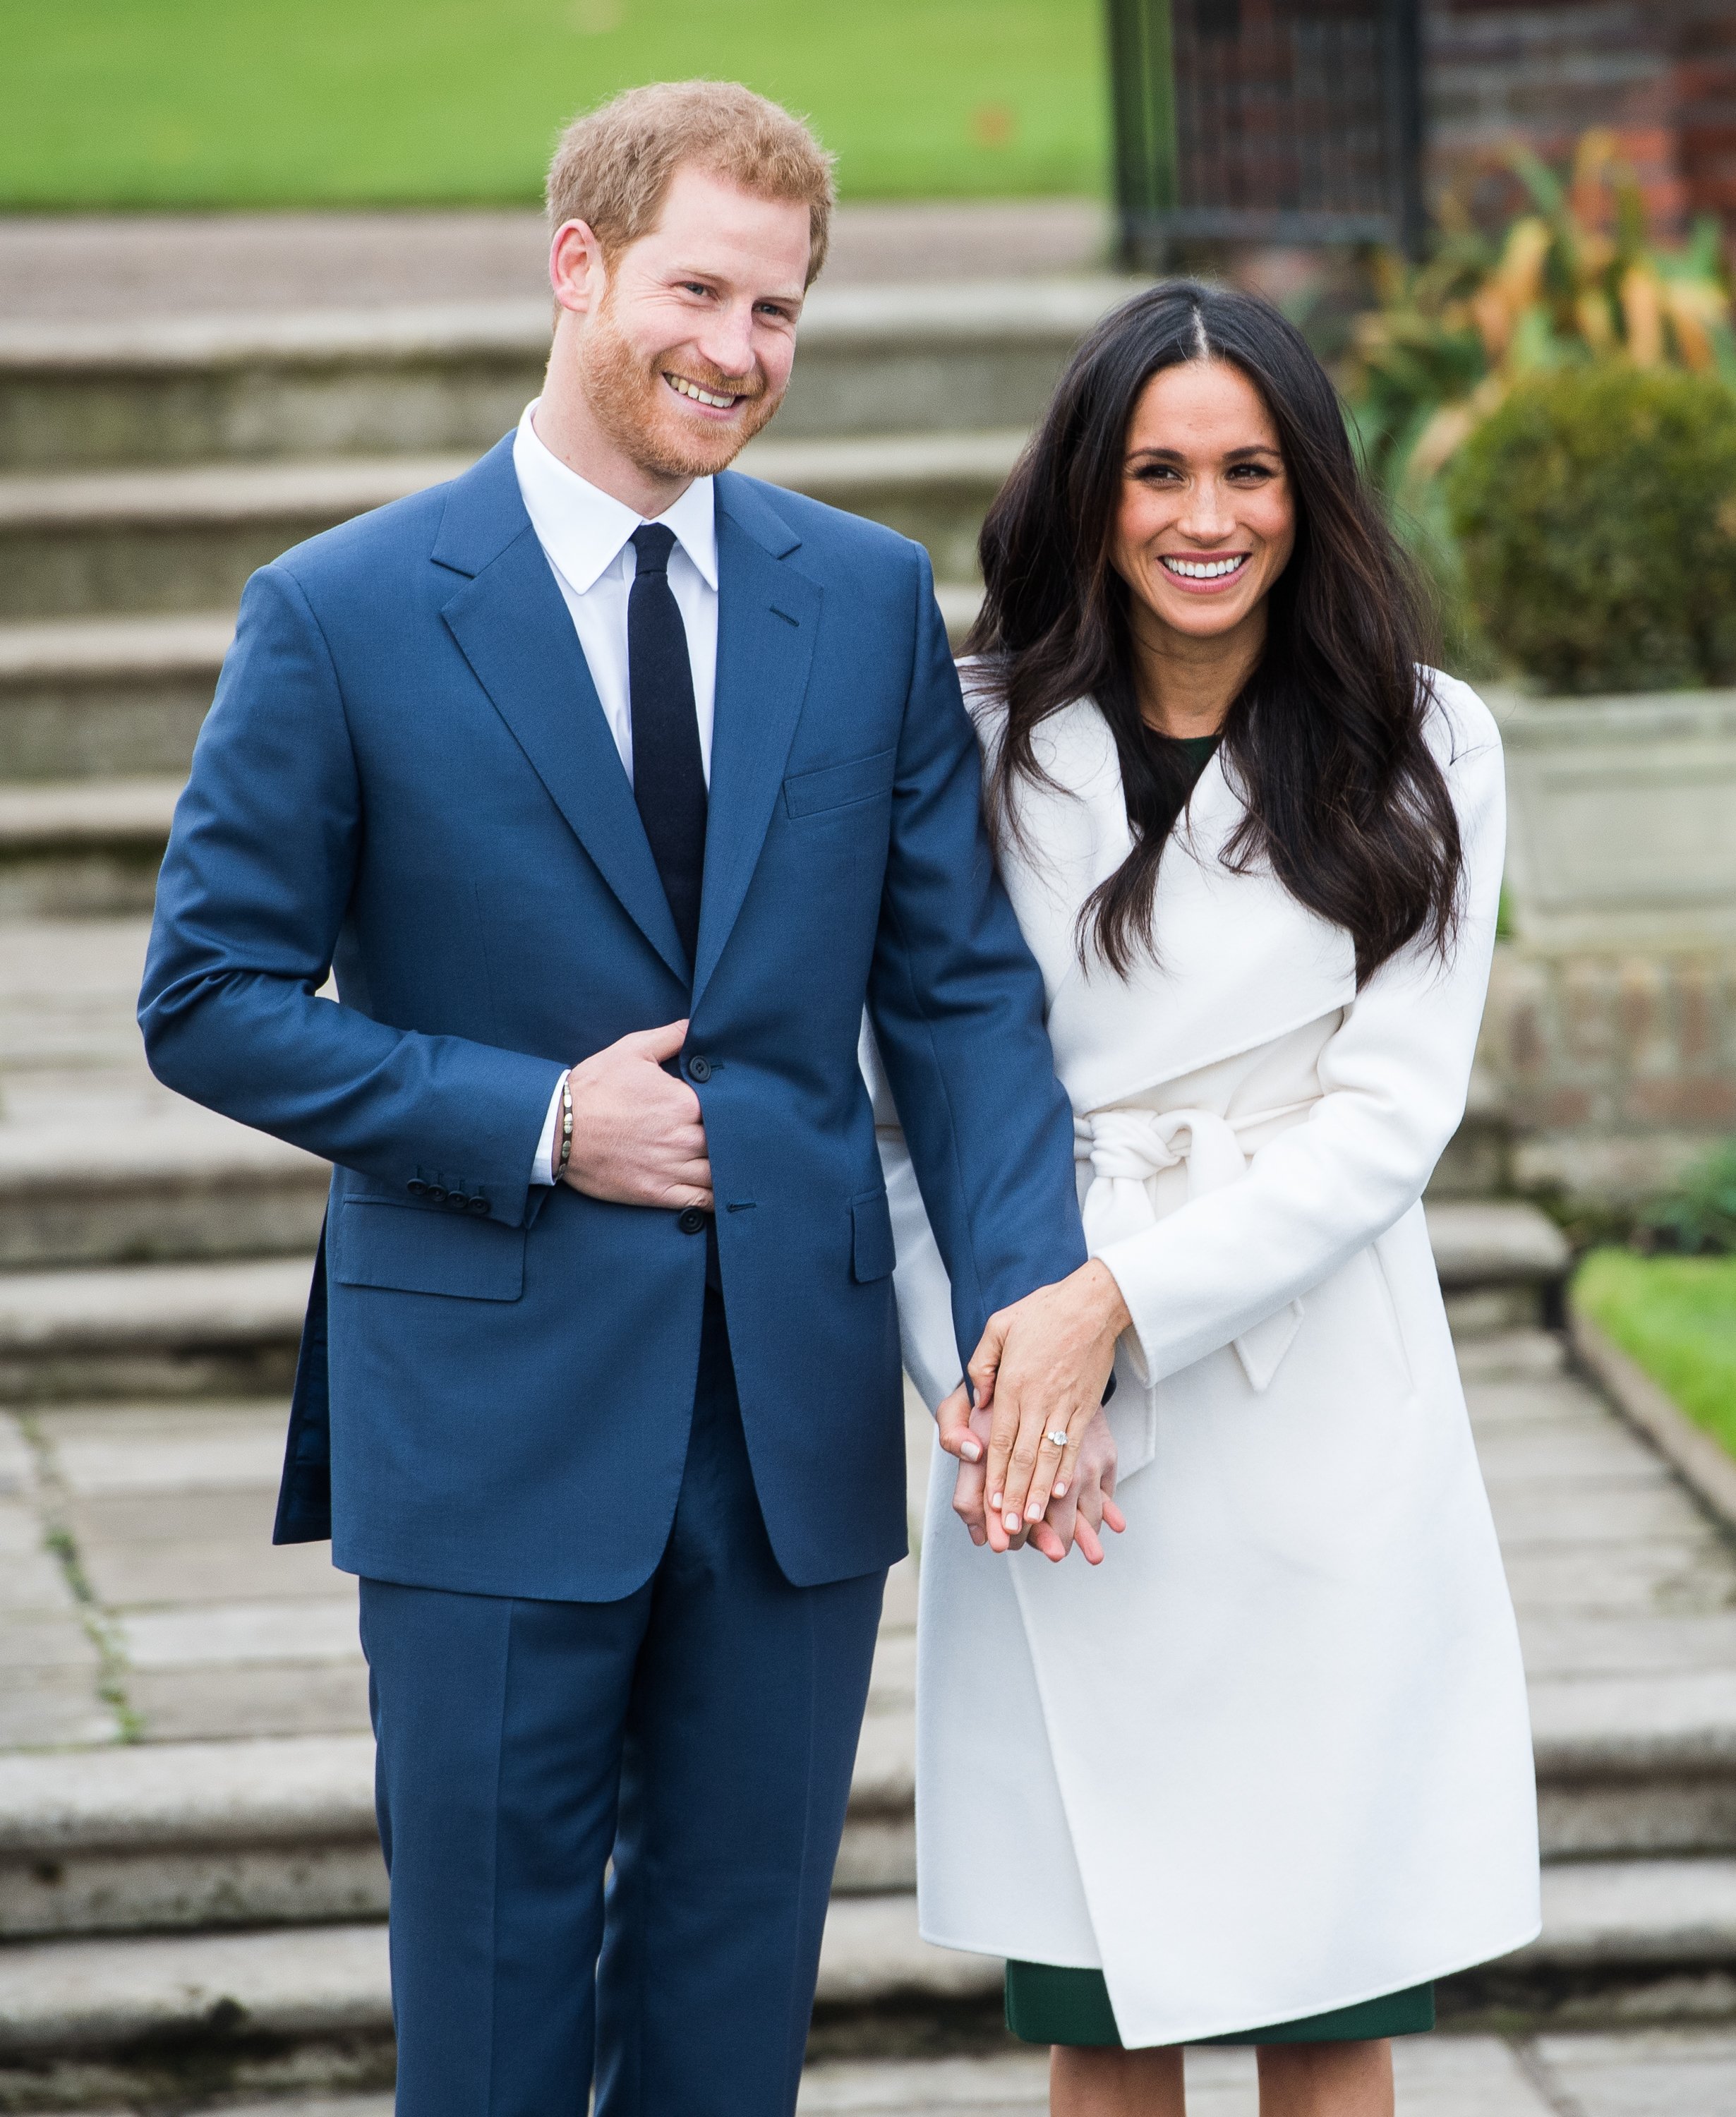 Prince Harry and Meghan Markle during an official photocall to announce their engagement at Kensington Palace on November 27, 2017, in London, England. | Source: Getty Images